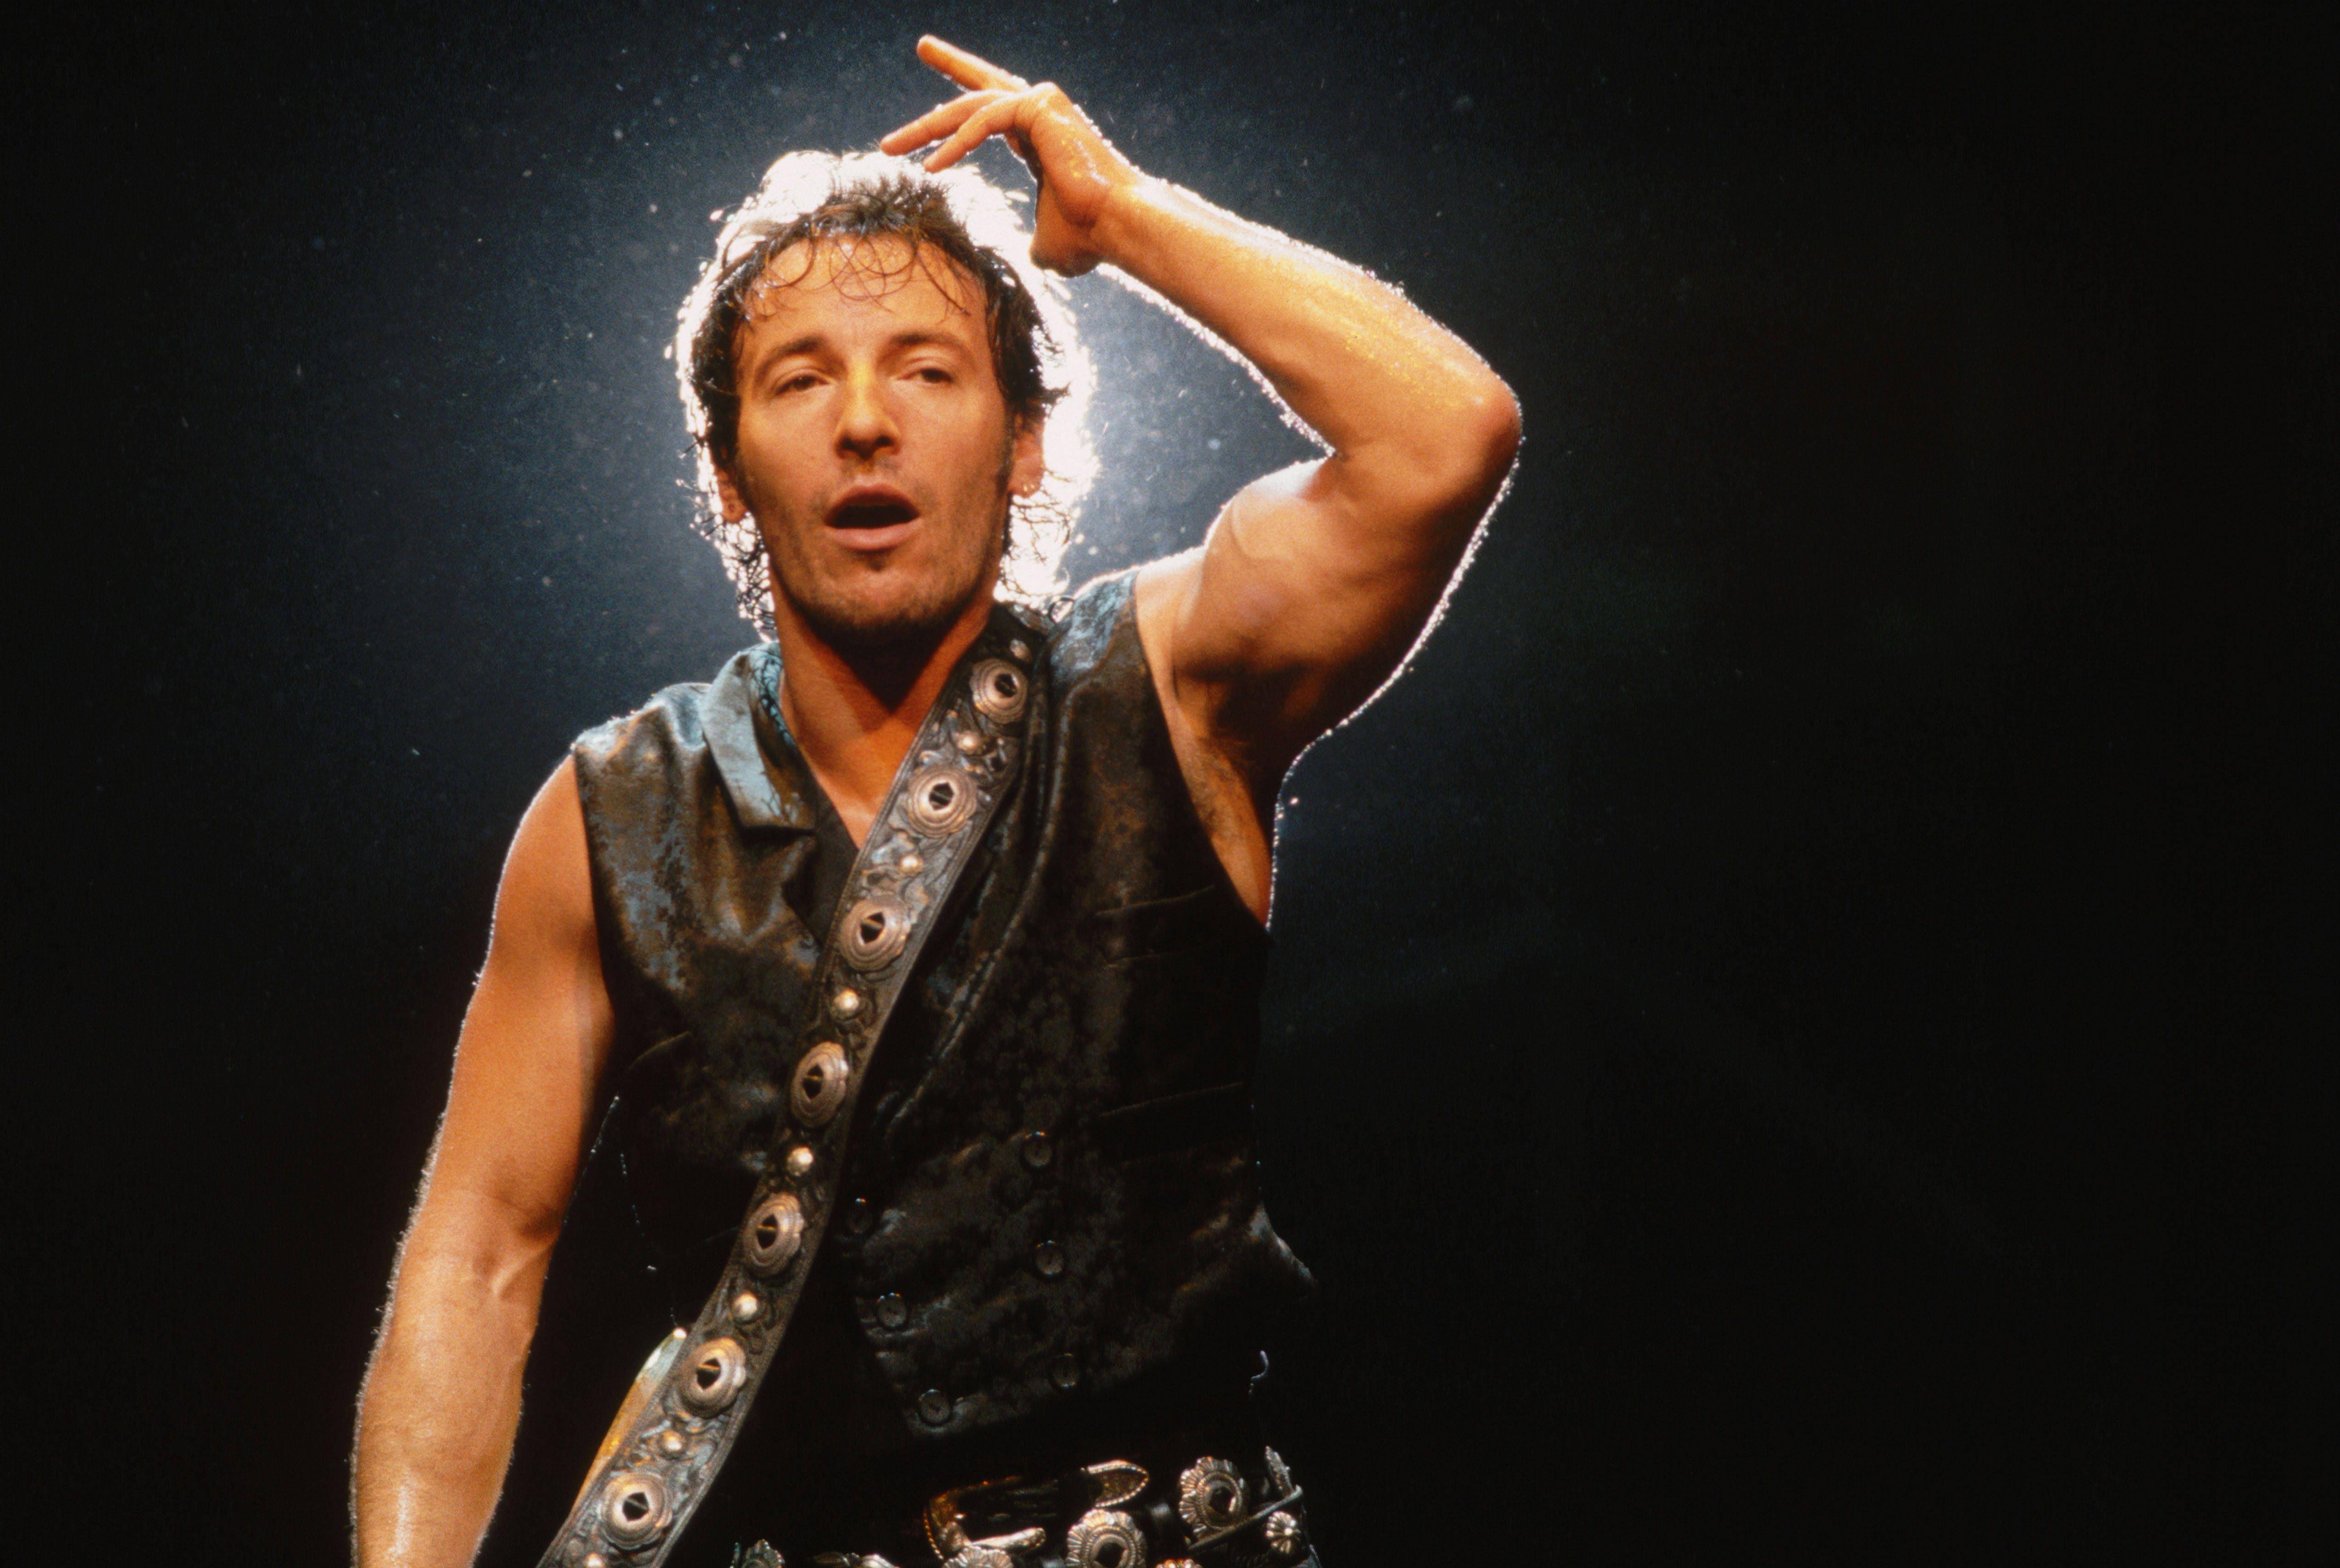 Bruce Springsteen Wallpapers - Top Free Bruce Springsteen Backgrounds ...